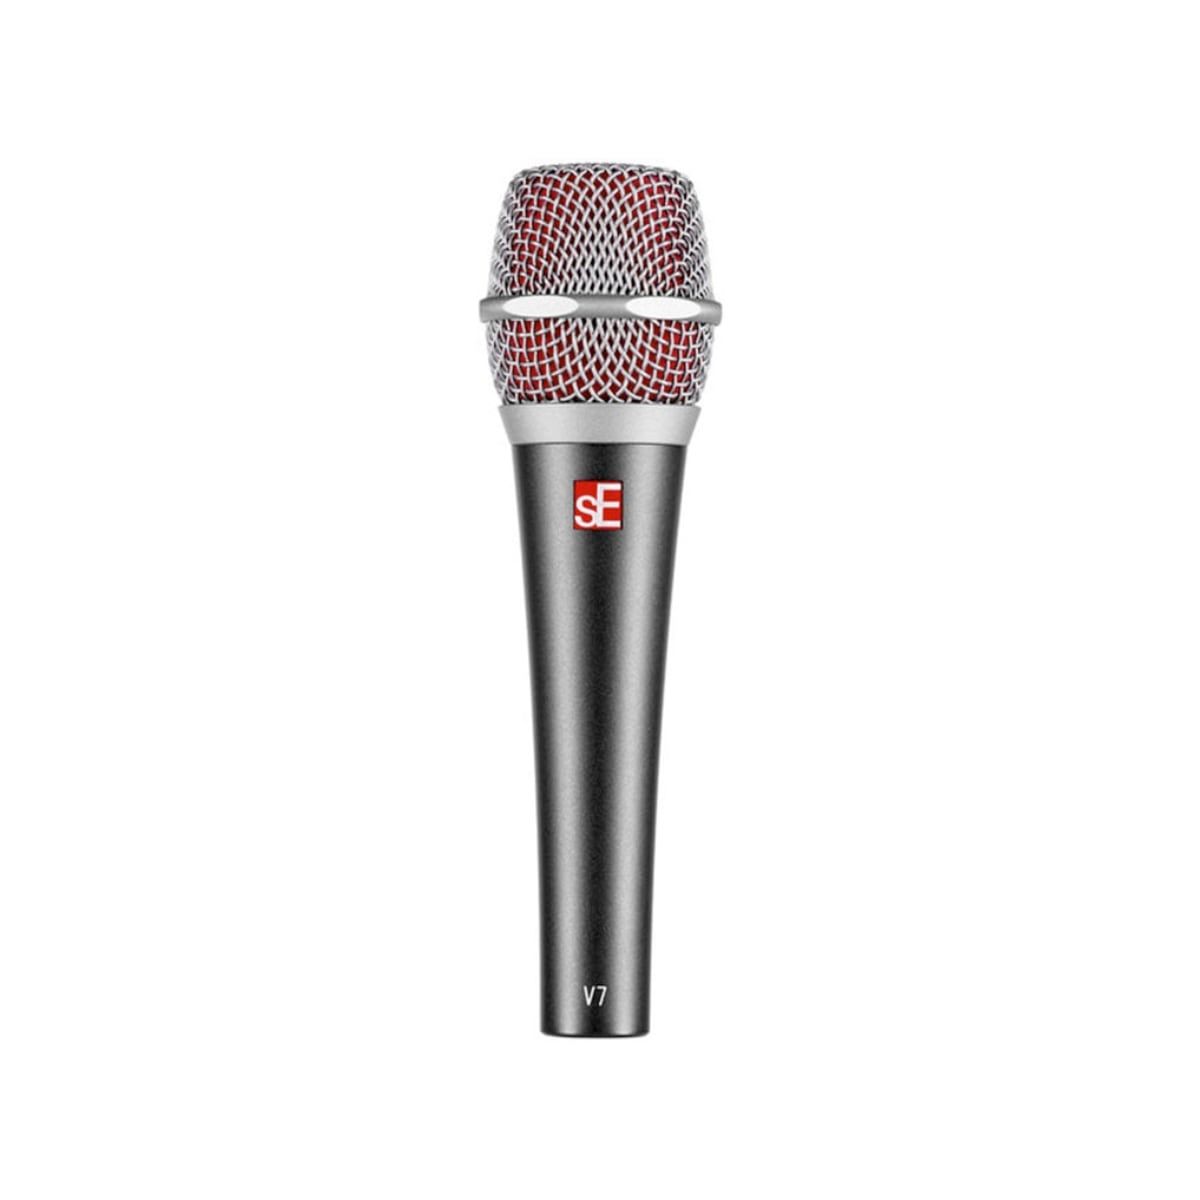 sE V7 Supercardioid Dynamic Vocal Microphone